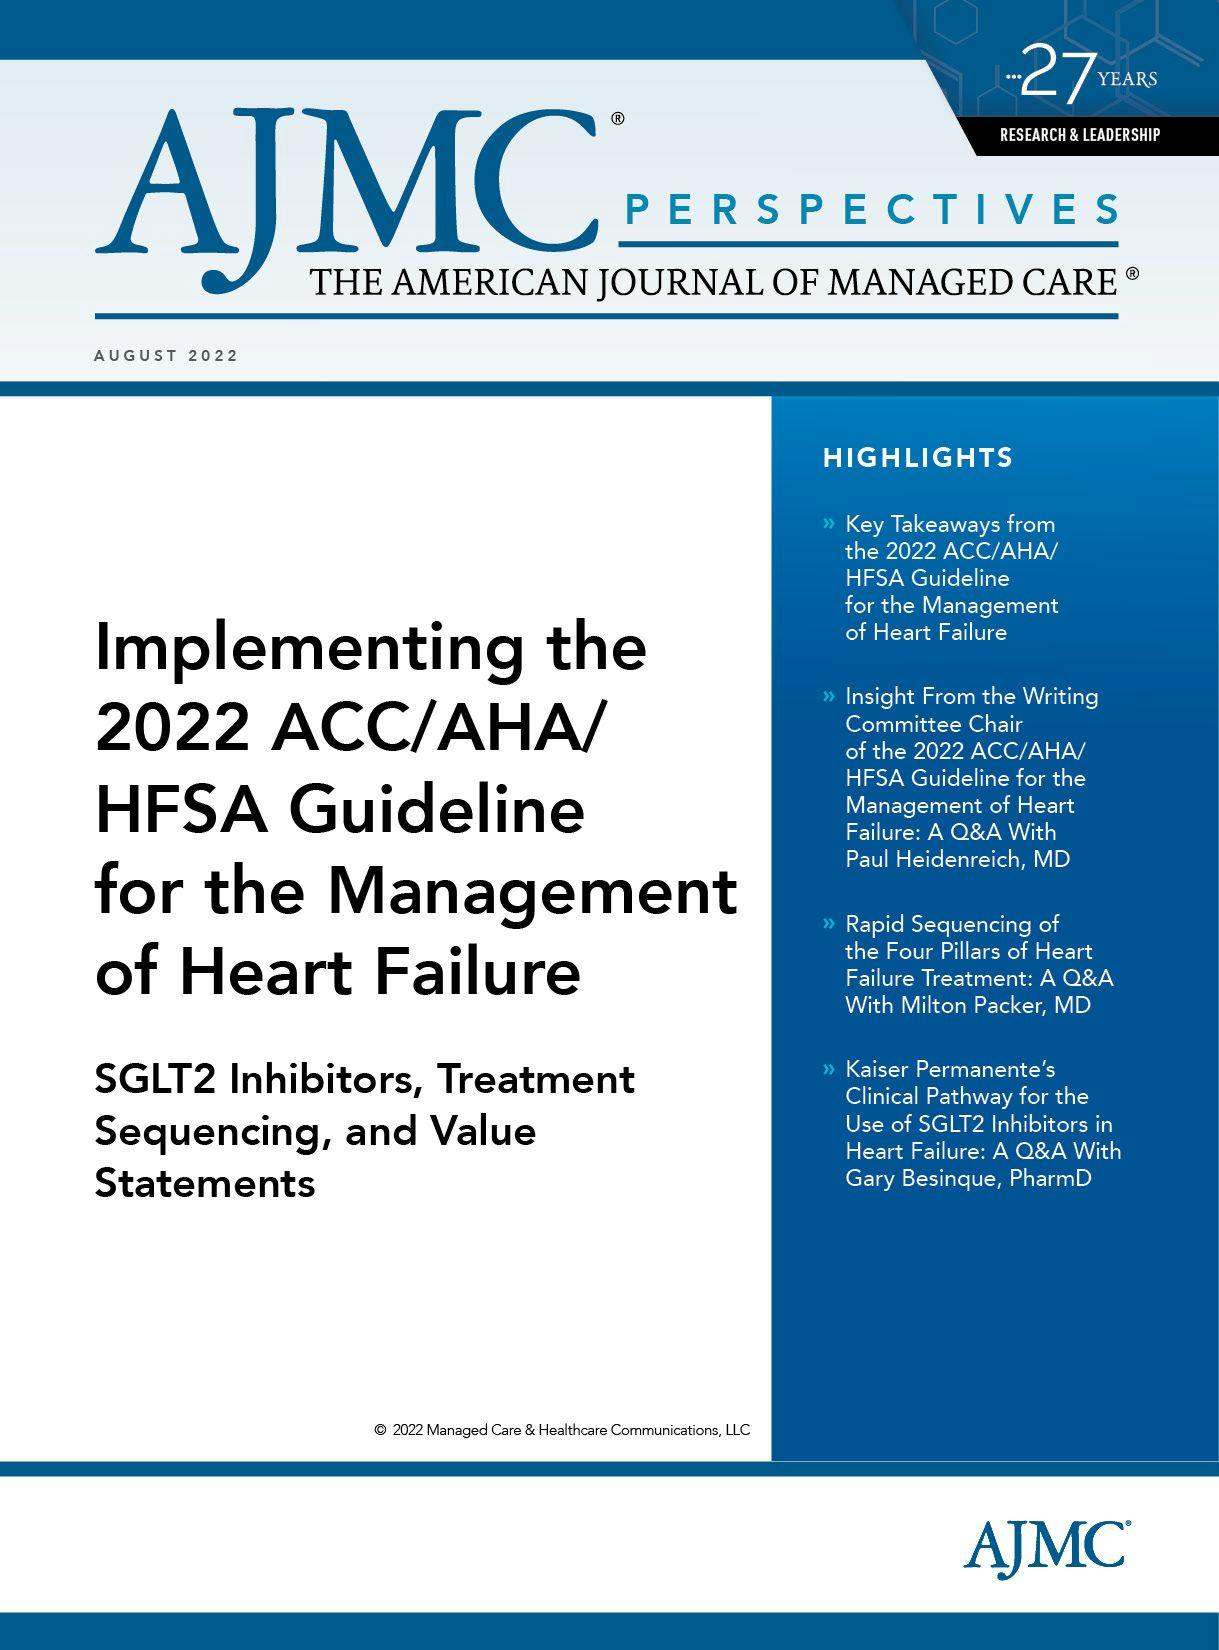 Implementing the 2022 ACC/AHA/HFSA Guideline for the Management of Heart Failure:  SGLT2 Inhibitors, Treatment Sequencing, and Value Statements